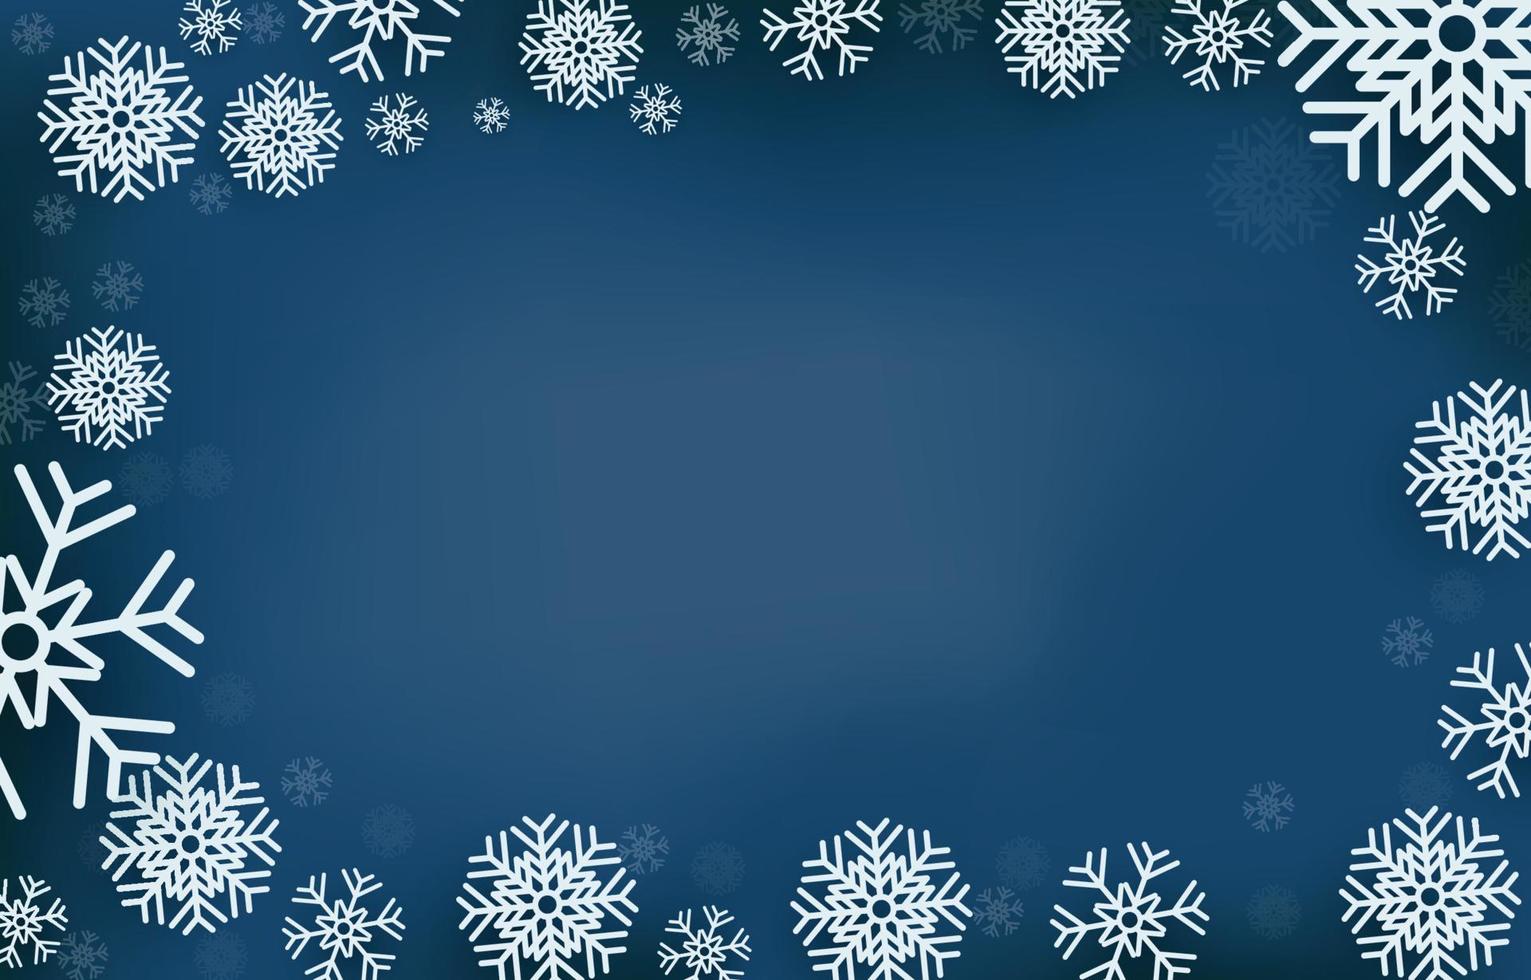 Dark blue background with blank frame decorated with snowflakes, vector illustration of winter christmas and new year.